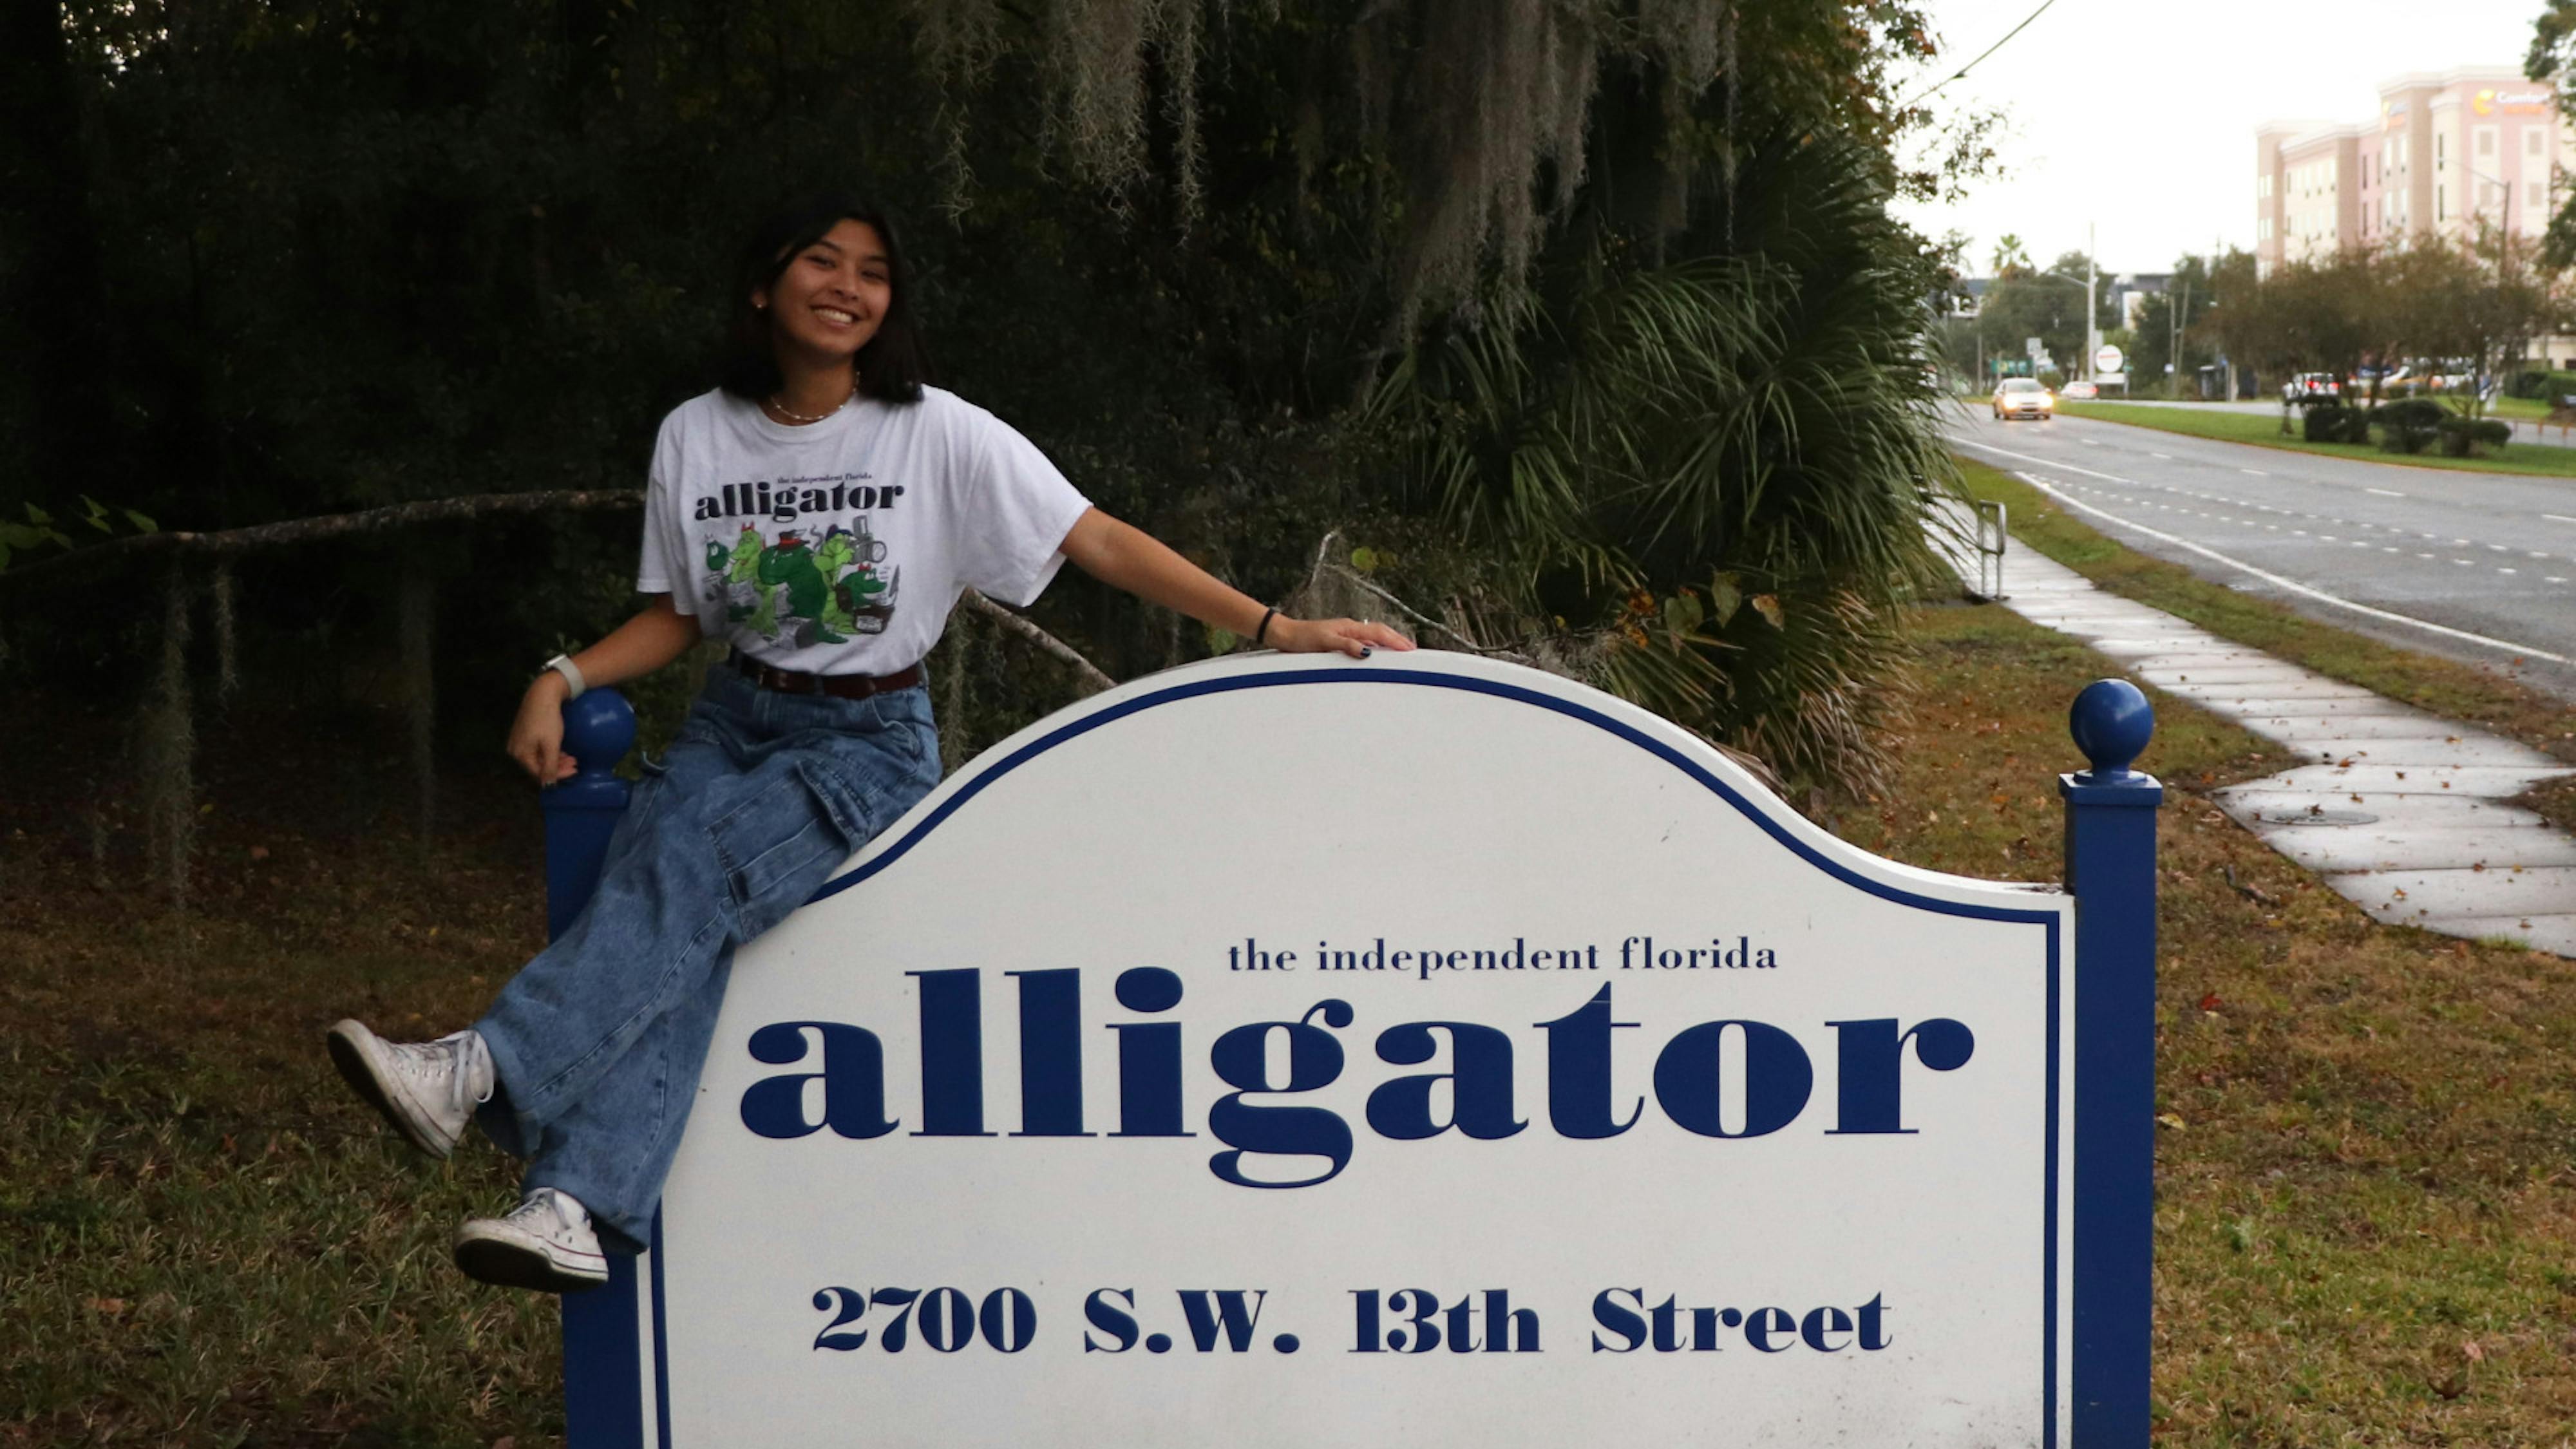 The Alligator made me want to change my major  - The Independent Florida Alligator